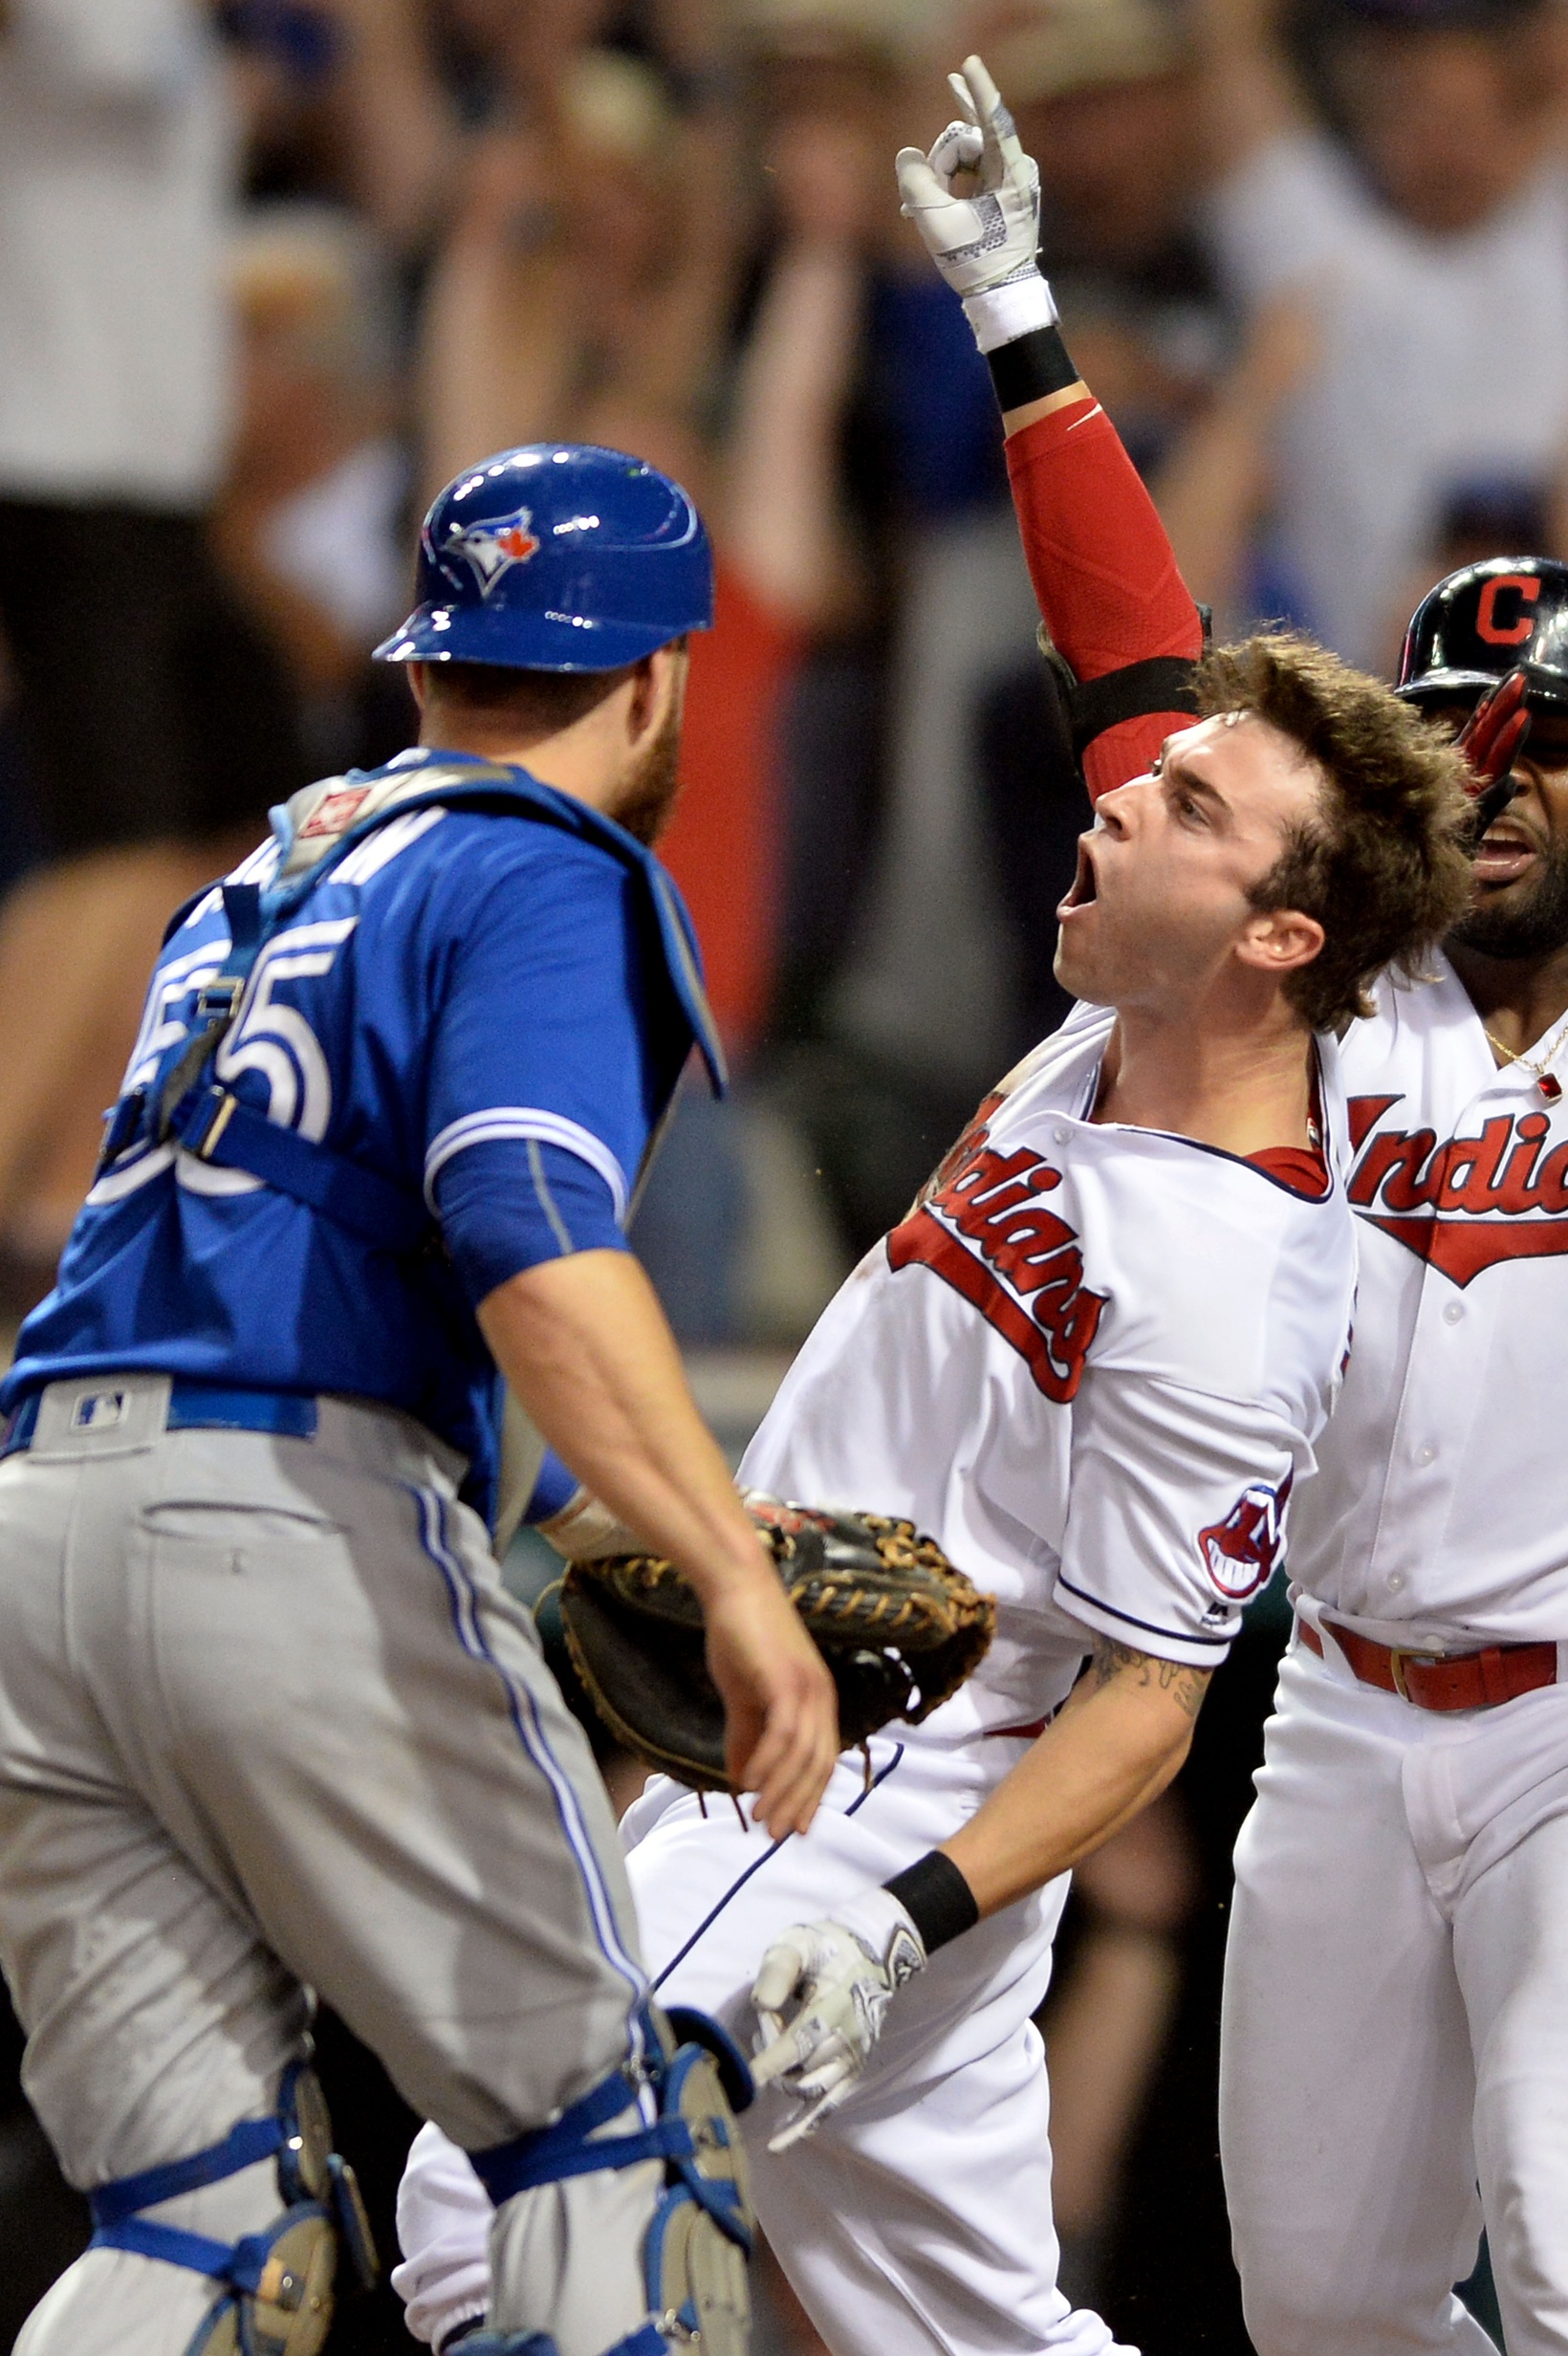 Tyler Naquin's walk-off inside-the-park home run happened 1 year ago today